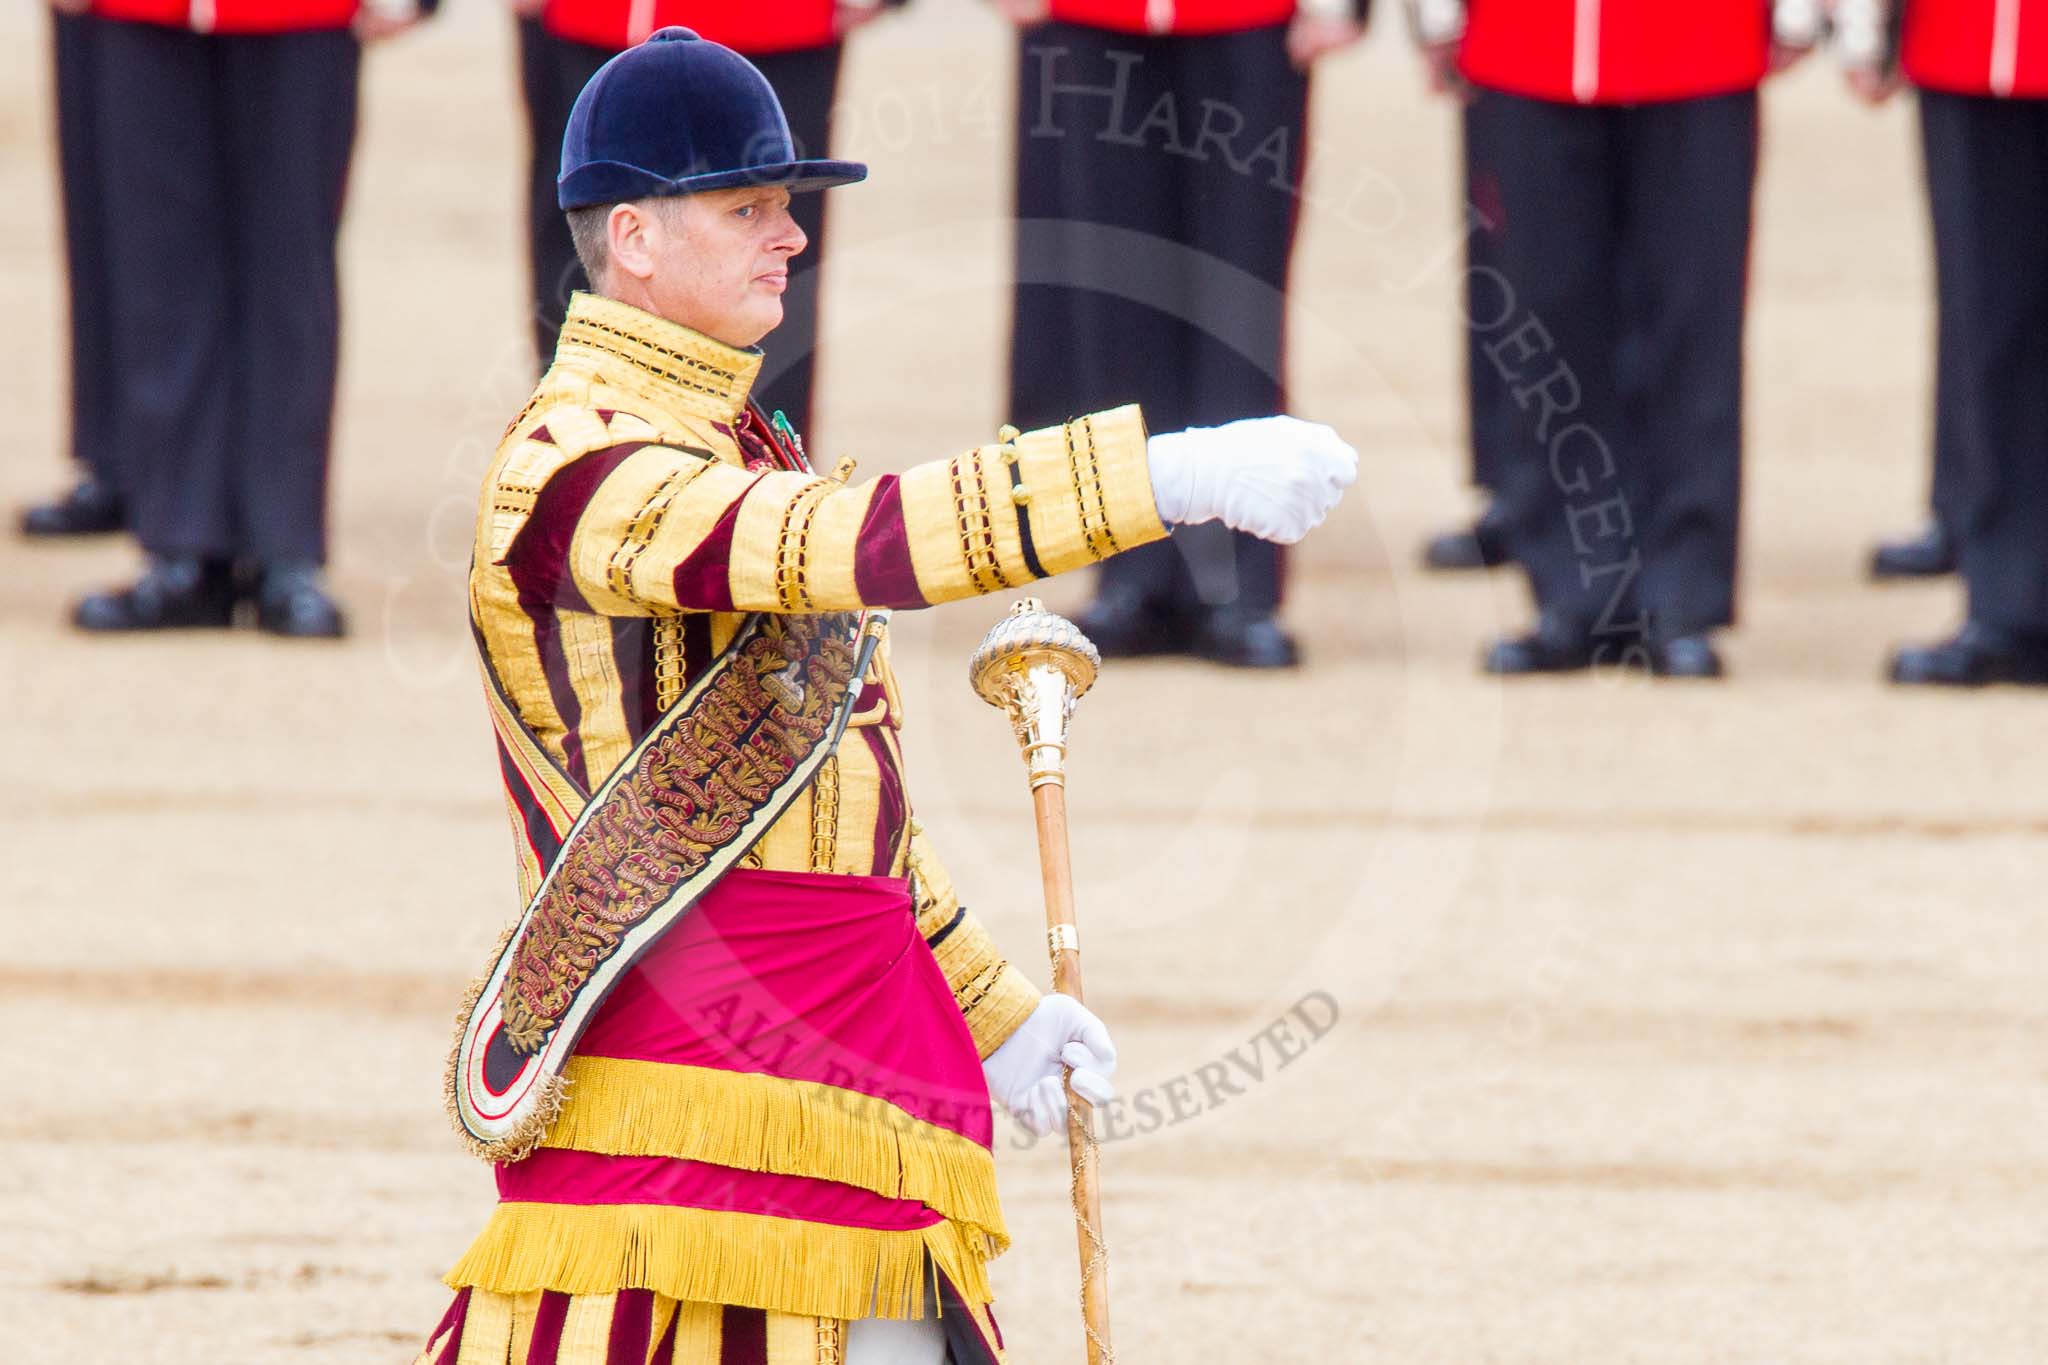 Trooping the Colour 2014.
Horse Guards Parade, Westminster,
London SW1A,

United Kingdom,
on 14 June 2014 at 11:14, image #479